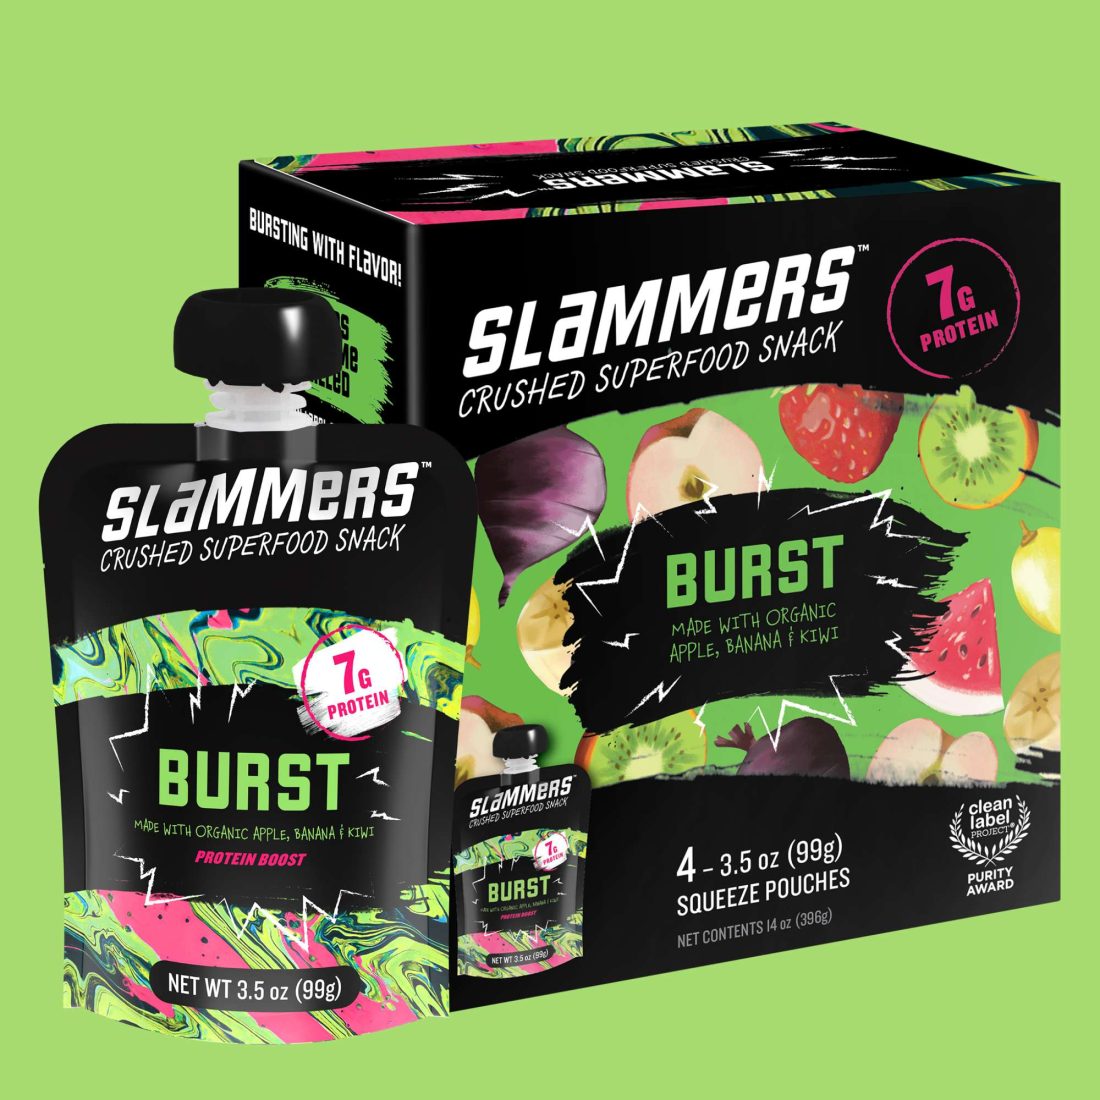 Slammers Burst pouch with box_green background